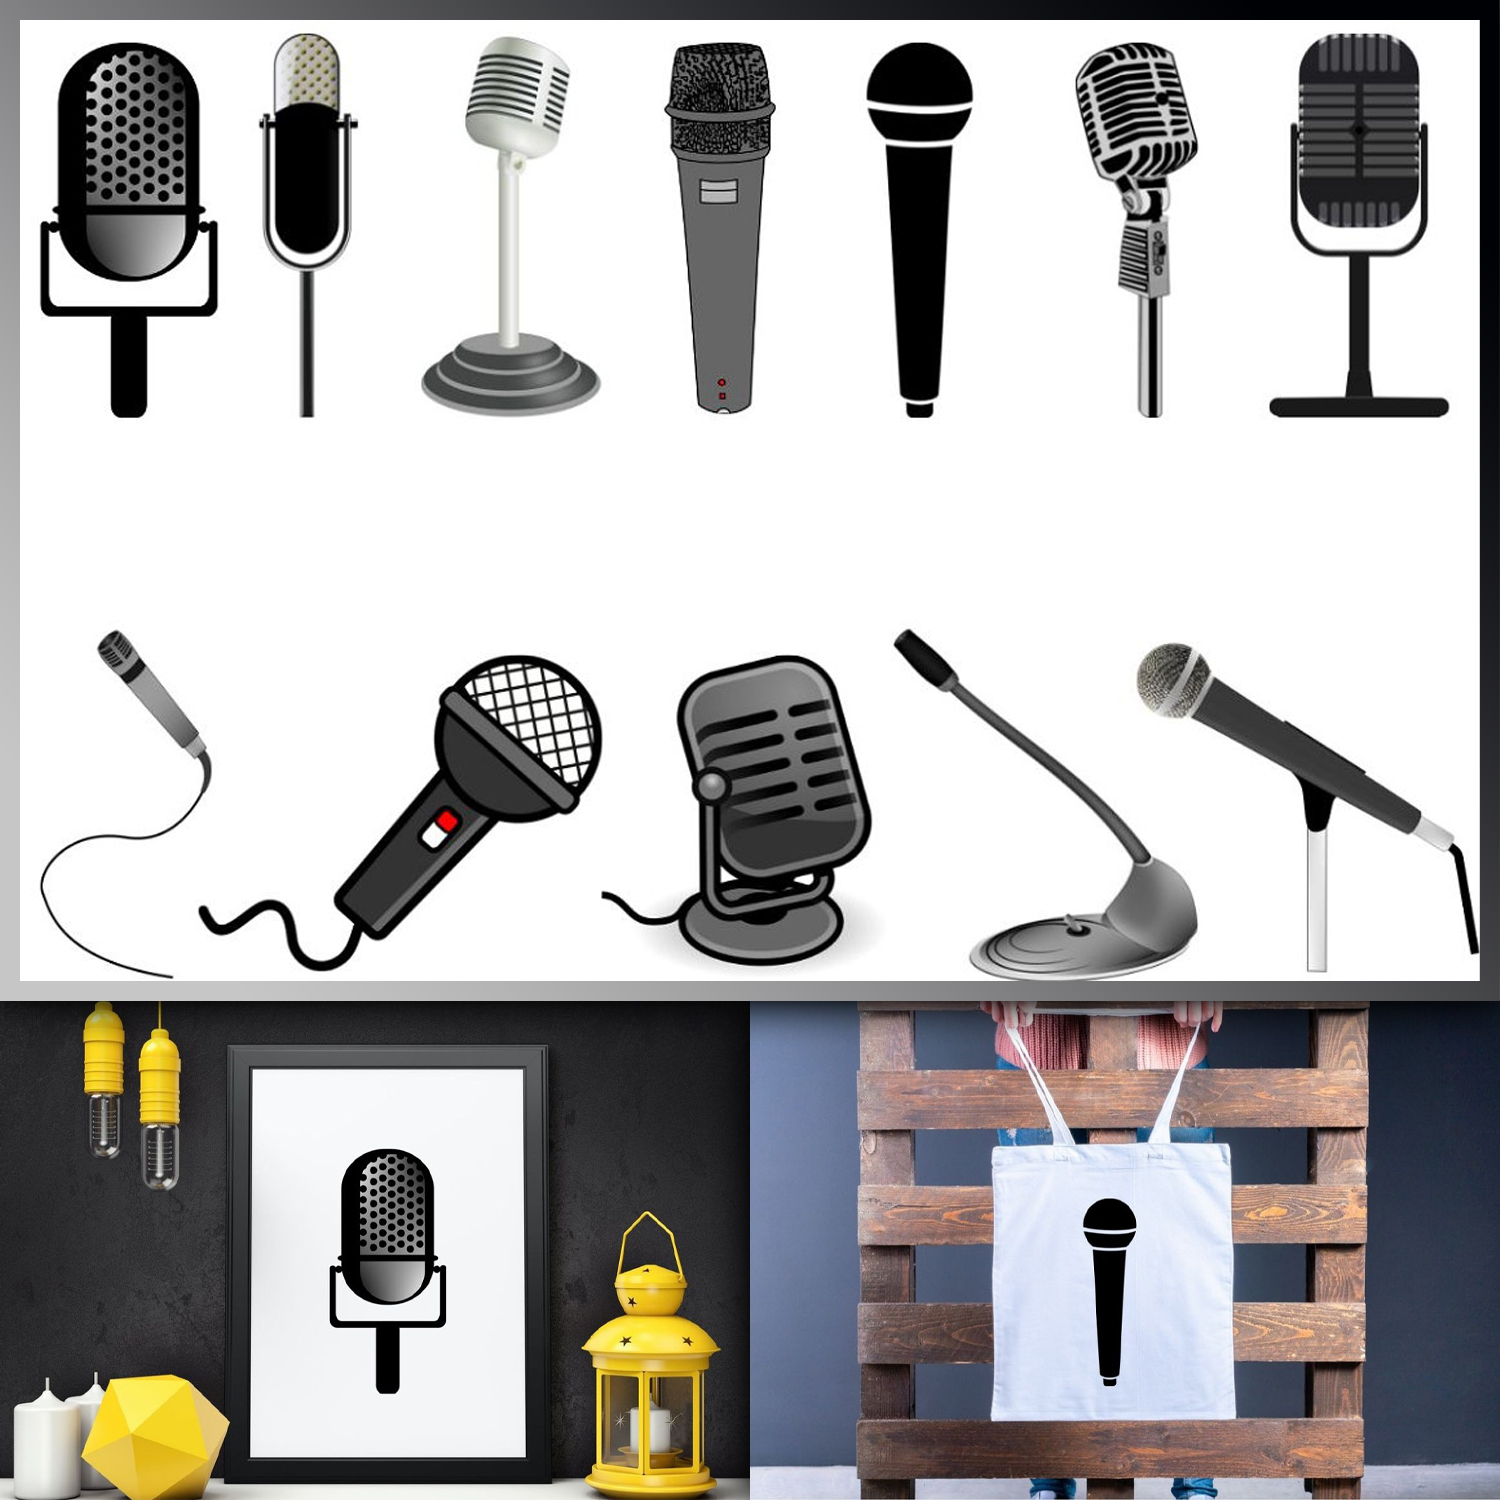 Microphone Vector Illustration cover.